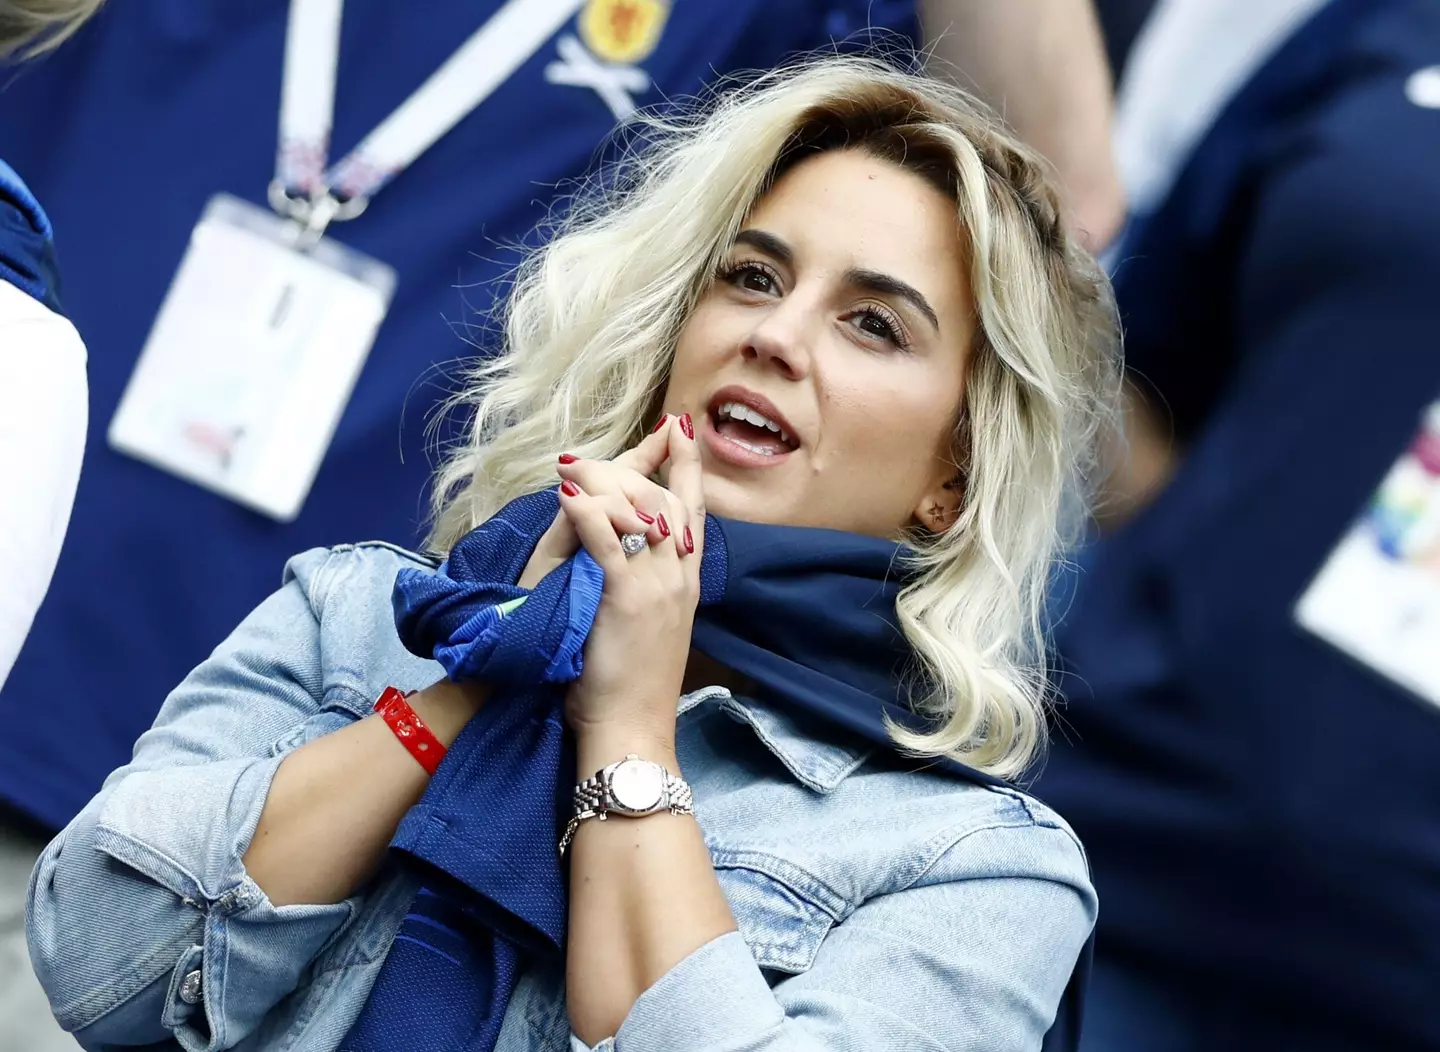 Antoine Griezmann’s wife, Erika Choperena, during France vs Uruguay at the 2018 World Cup in Russia.